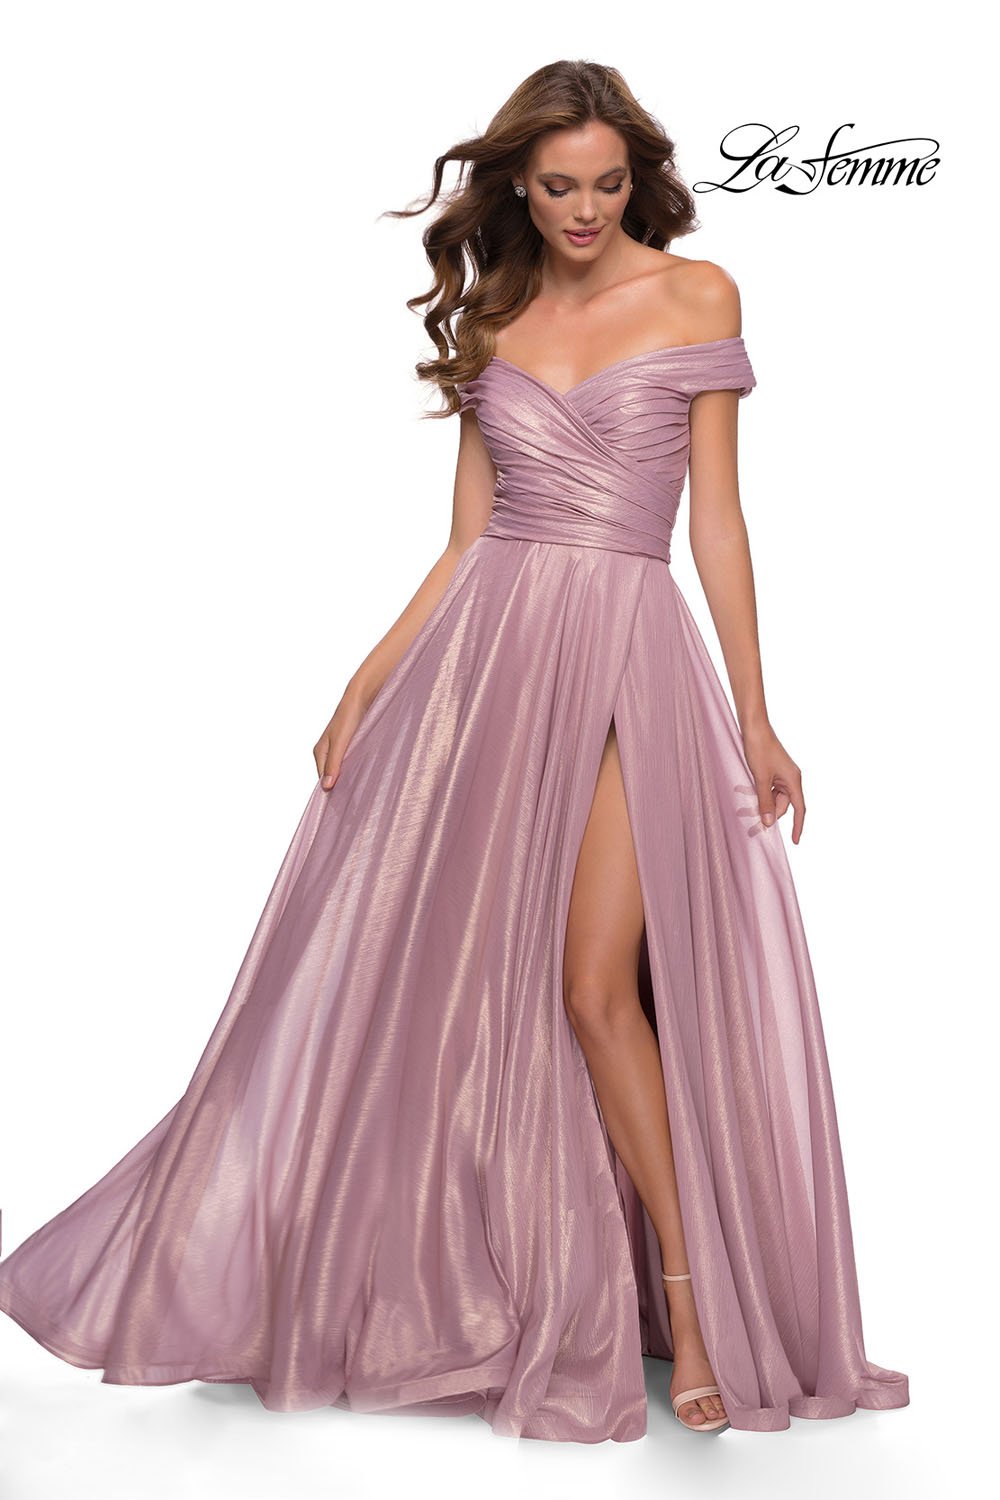 La Femme 29172 dress images in these colors: Pink Metallic.